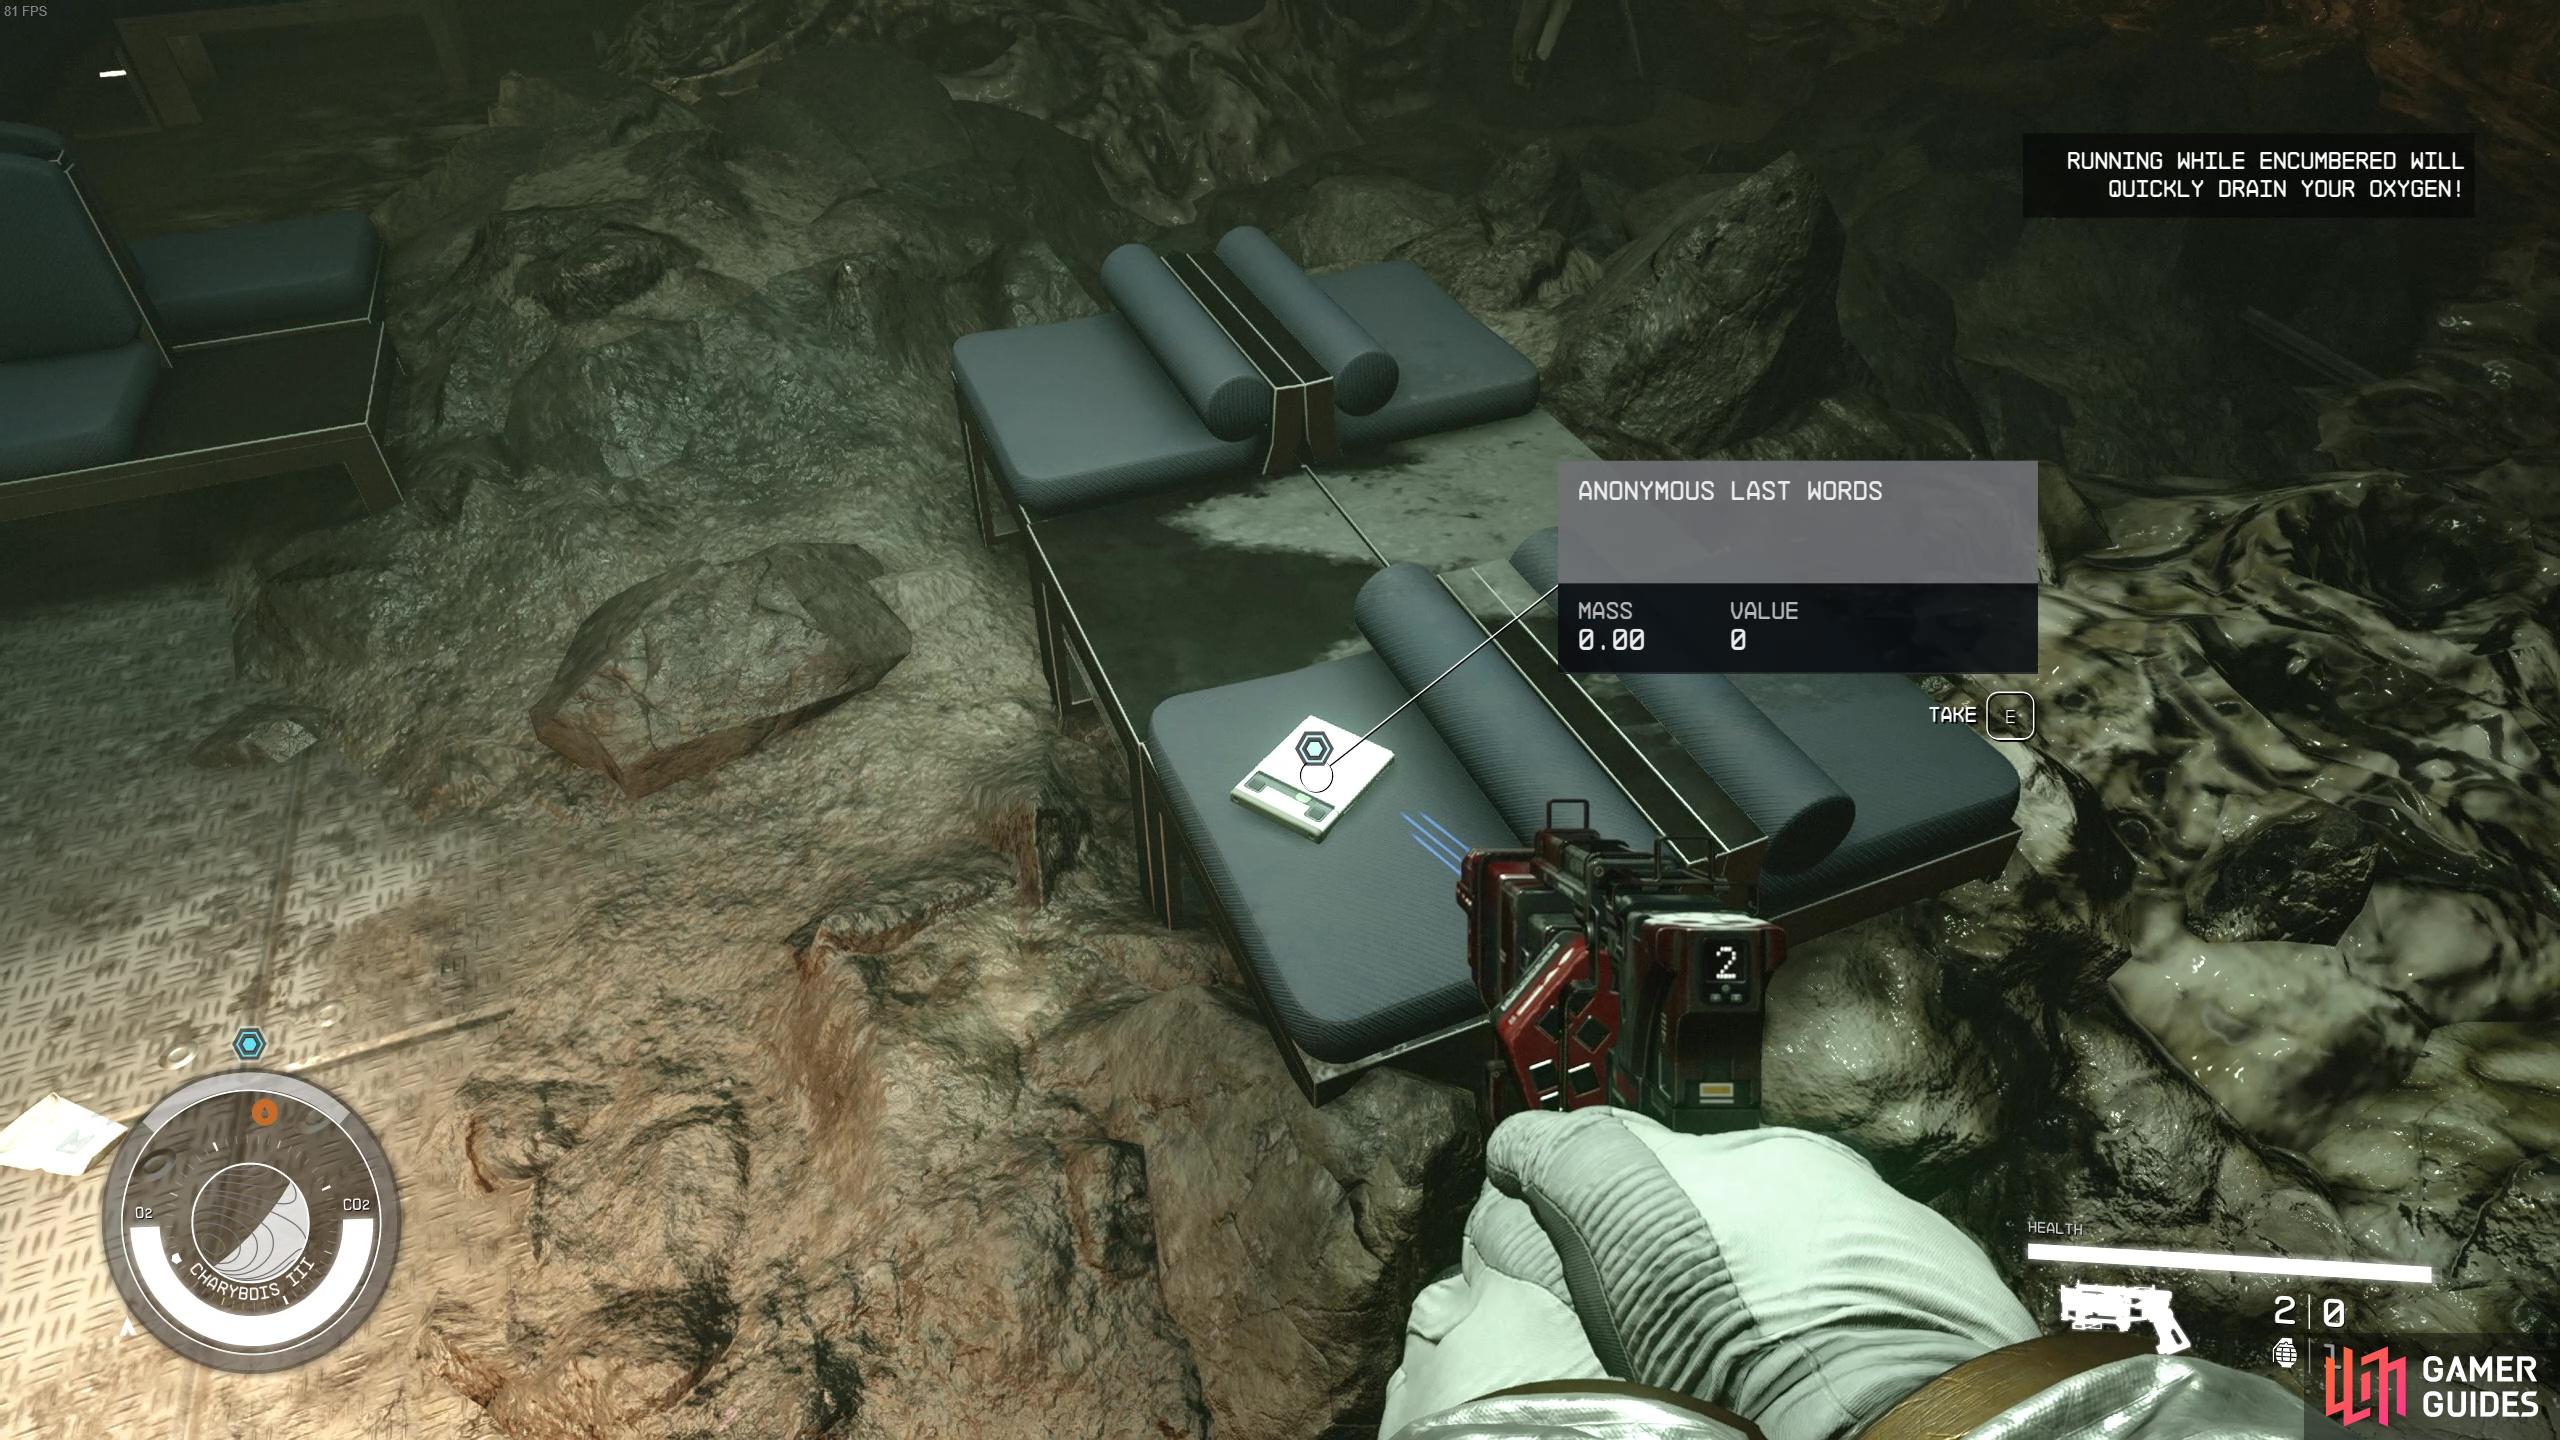 The fifth clue can be found on a chair near the giant pit in the ground.